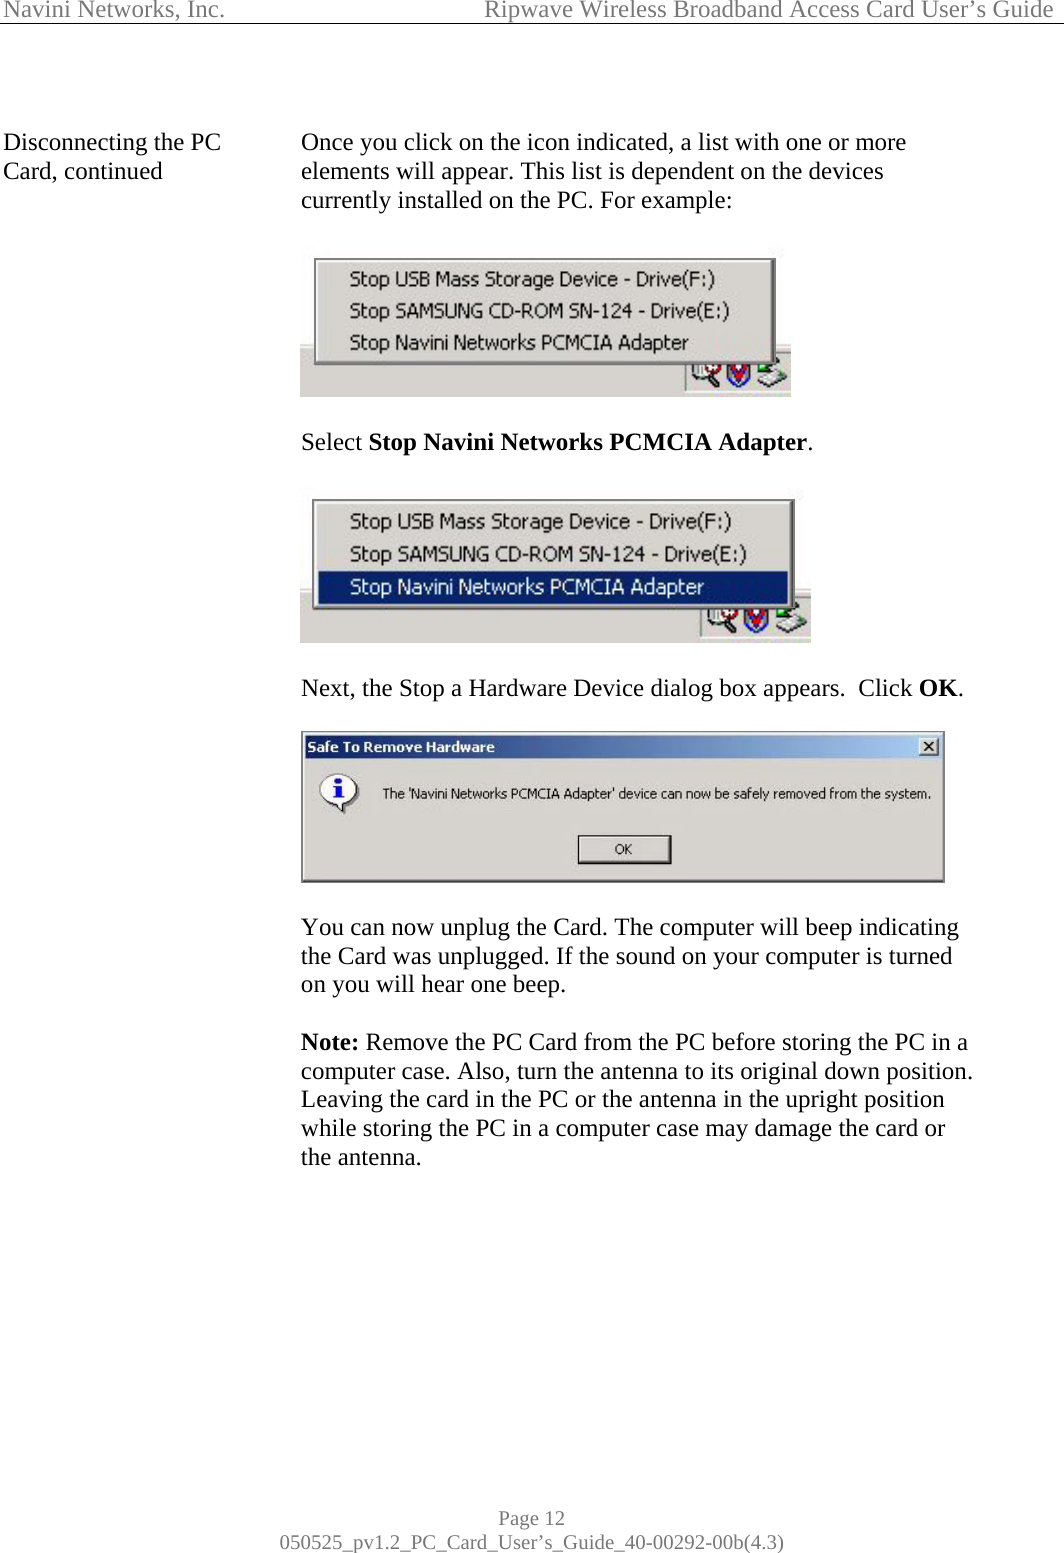 Navini Networks, Inc.            Ripwave Wireless Broadband Access Card User’s Guide Page 12 050525_pv1.2_PC_Card_User’s_Guide_40-00292-00b(4.3)  Disconnecting the PC Card, continued                                             Once you click on the icon indicated, a list with one or more elements will appear. This list is dependent on the devices currently installed on the PC. For example:     Select Stop Navini Networks PCMCIA Adapter.    Next, the Stop a Hardware Device dialog box appears.  Click OK.     You can now unplug the Card. The computer will beep indicating the Card was unplugged. If the sound on your computer is turned on you will hear one beep.  Note: Remove the PC Card from the PC before storing the PC in a computer case. Also, turn the antenna to its original down position. Leaving the card in the PC or the antenna in the upright position while storing the PC in a computer case may damage the card or the antenna.       